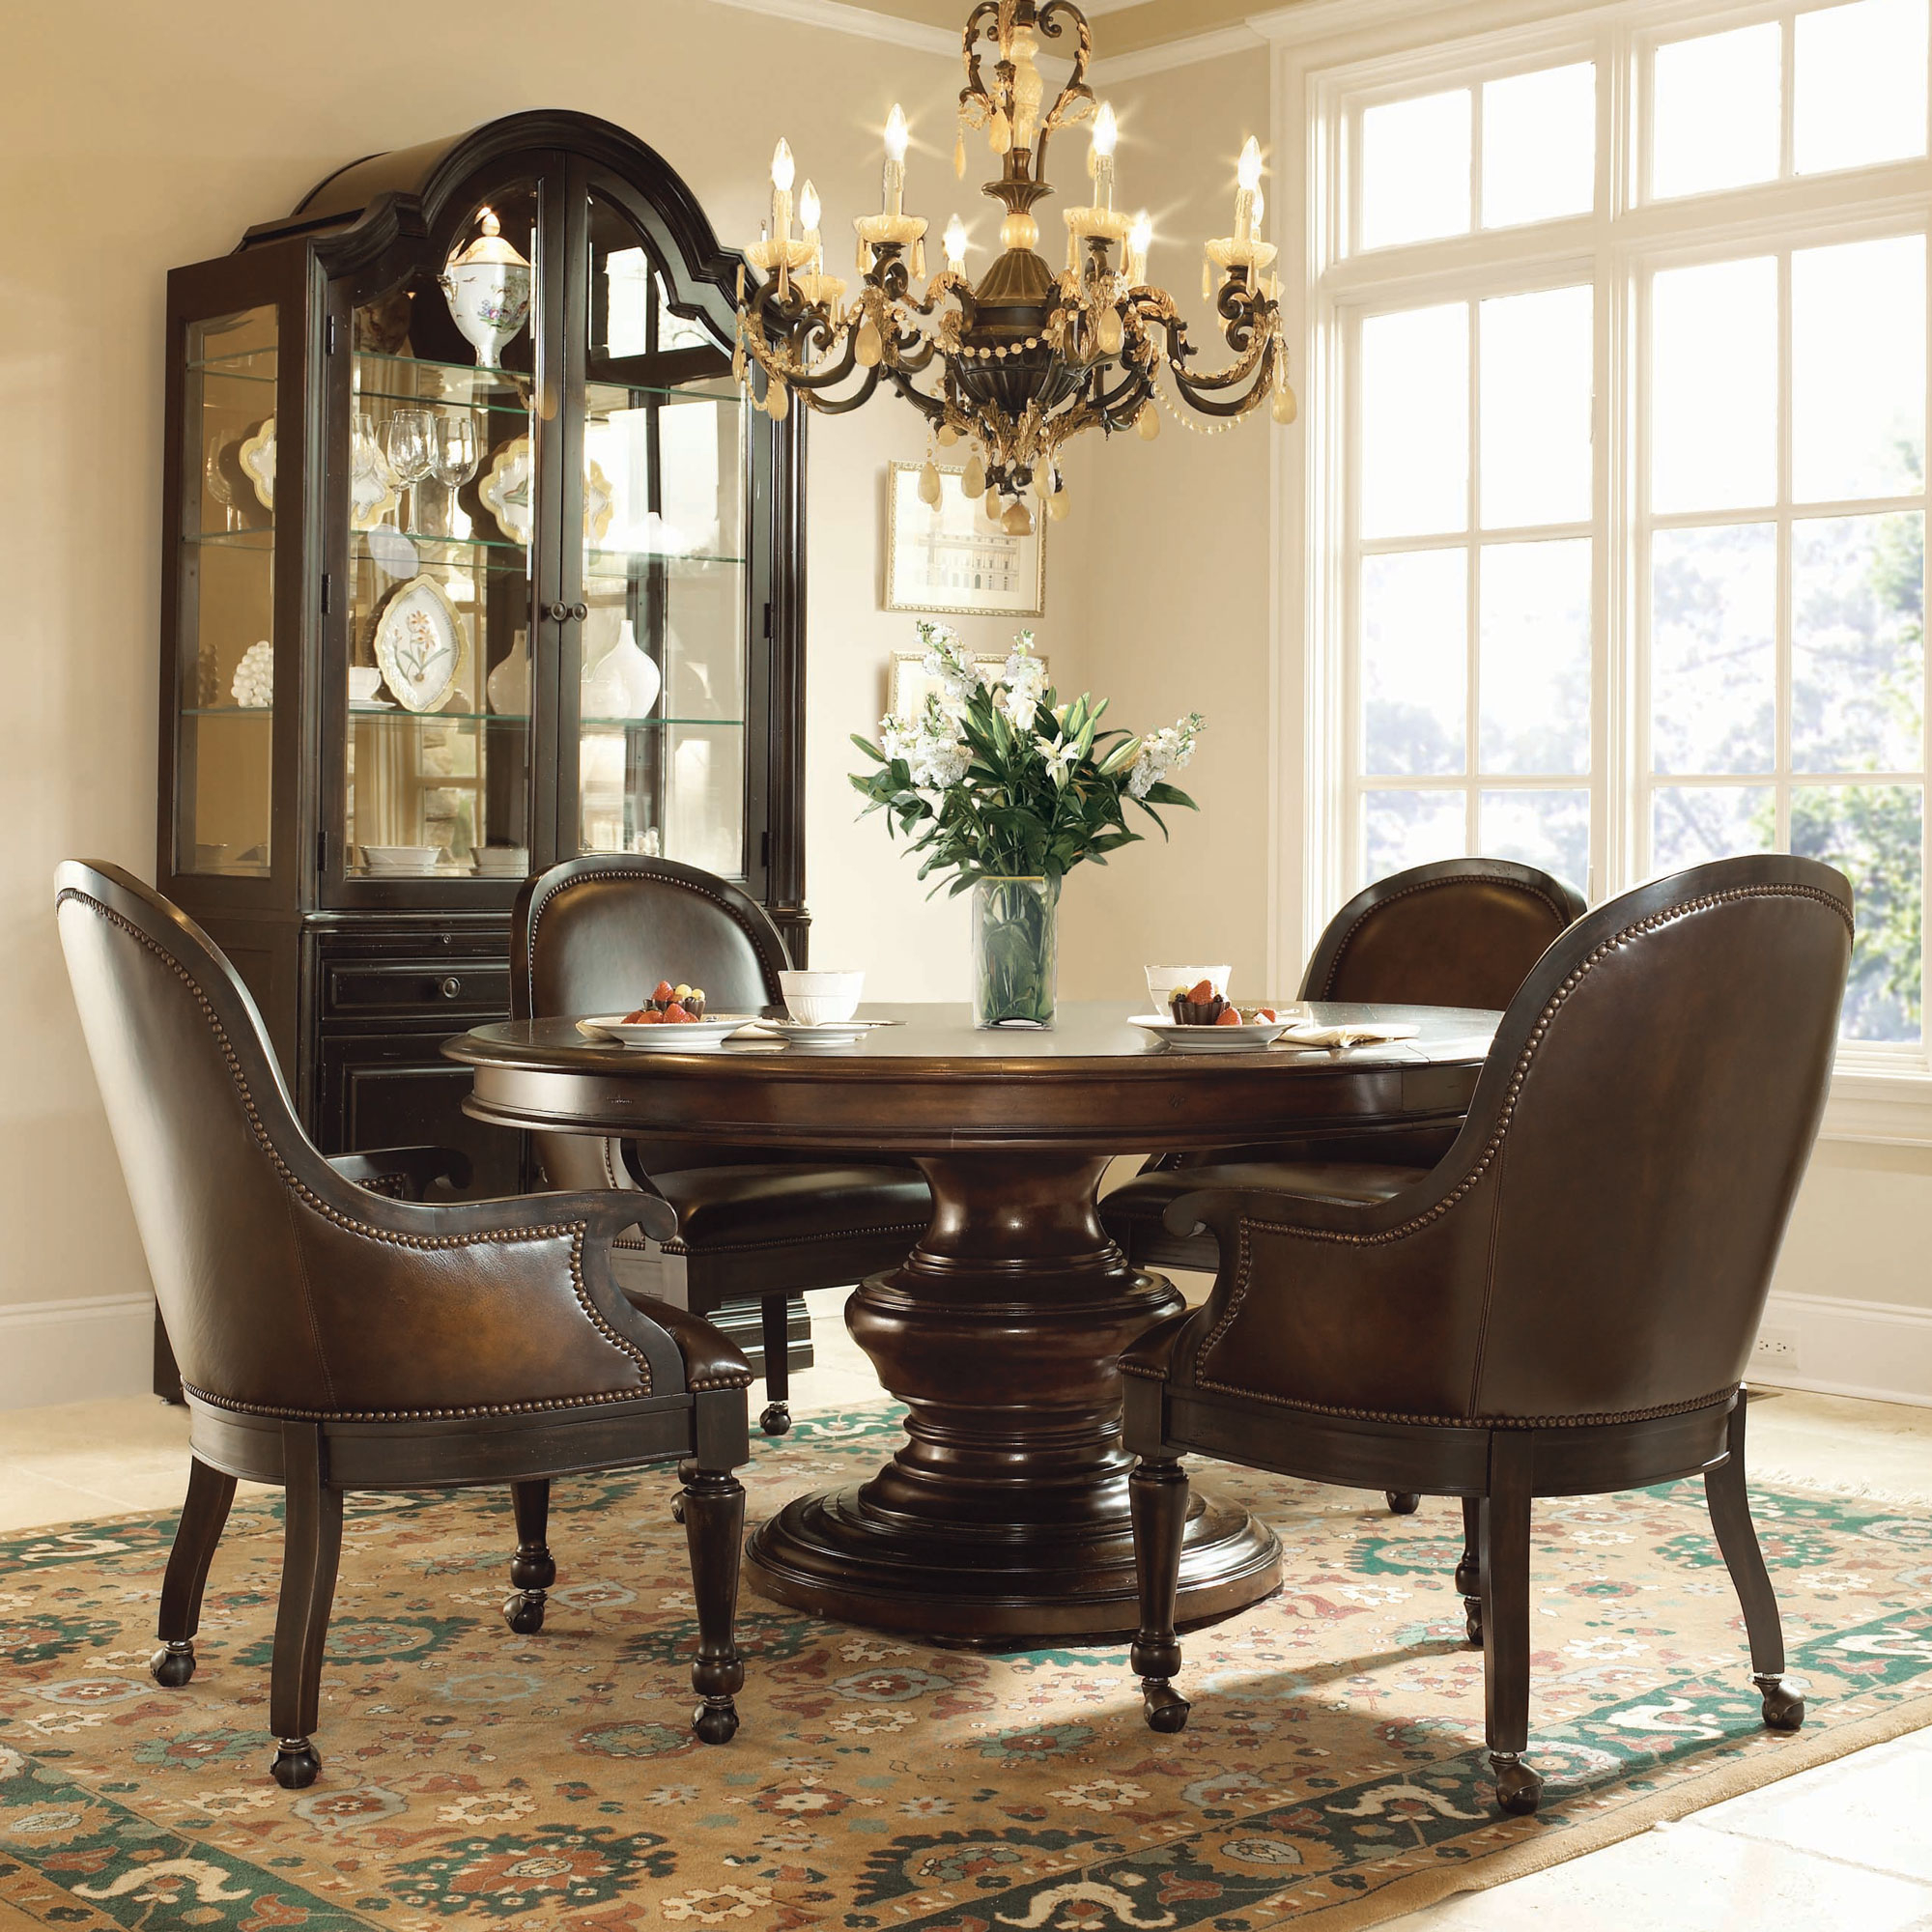 Round Dining Room Sets With Leaf - Ideas on Foter